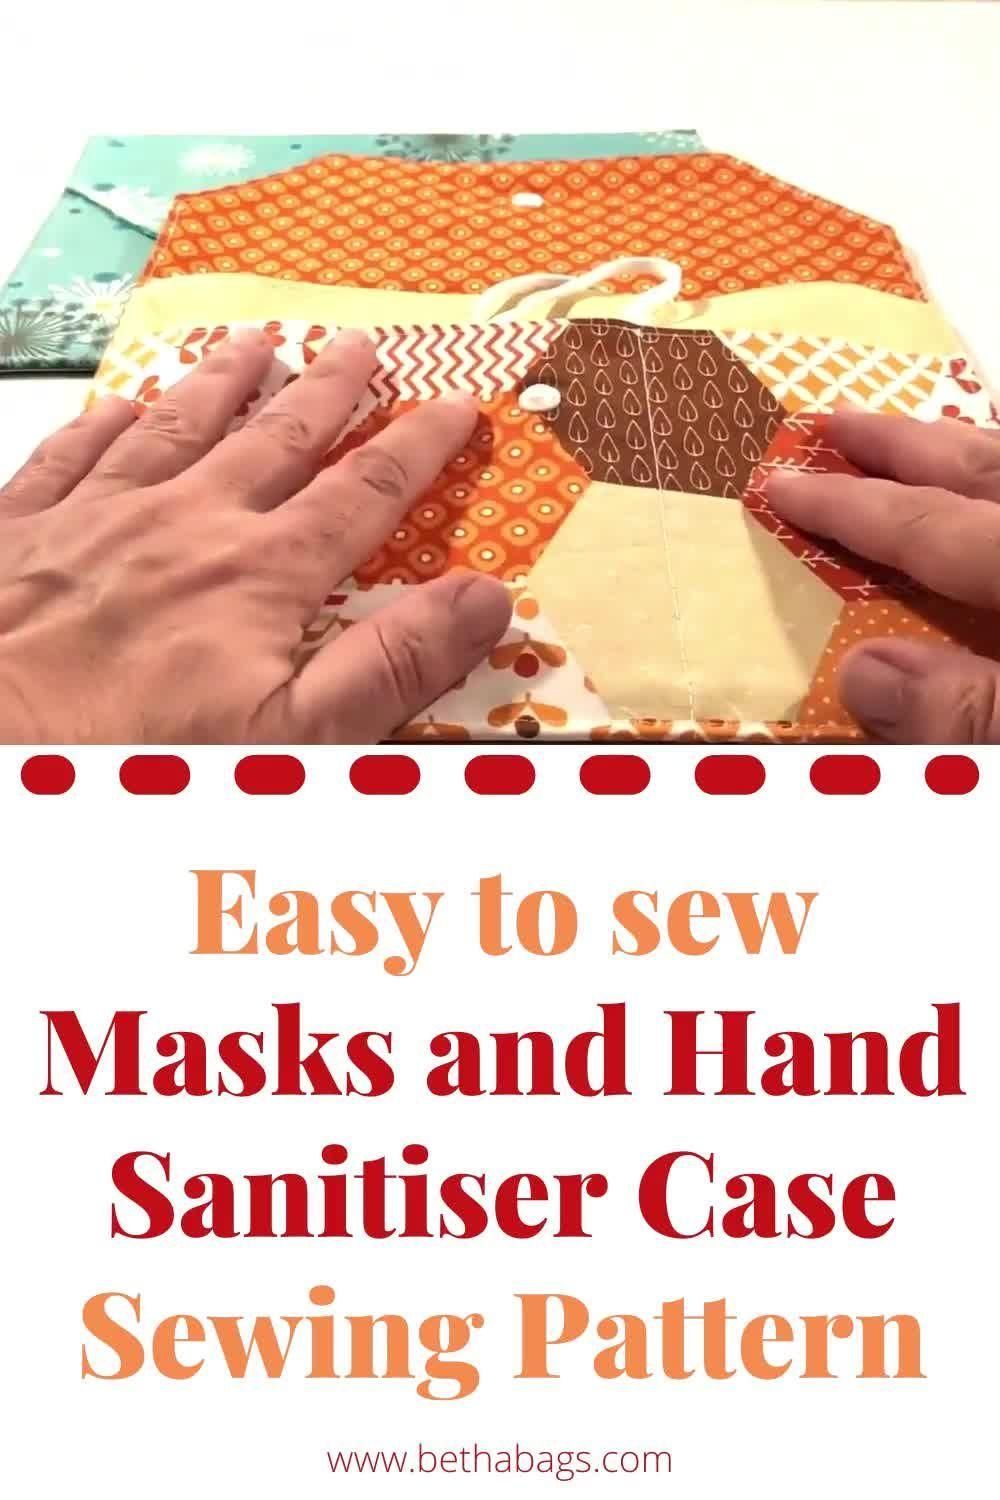 Masks and Hand Sanitiser Case Sewing Pattern PDF in A4 and | Etsy - Masks and Hand Sanitiser Case Sewing Pattern PDF in A4 and | Etsy -   19 fabric crafts diy easy ideas